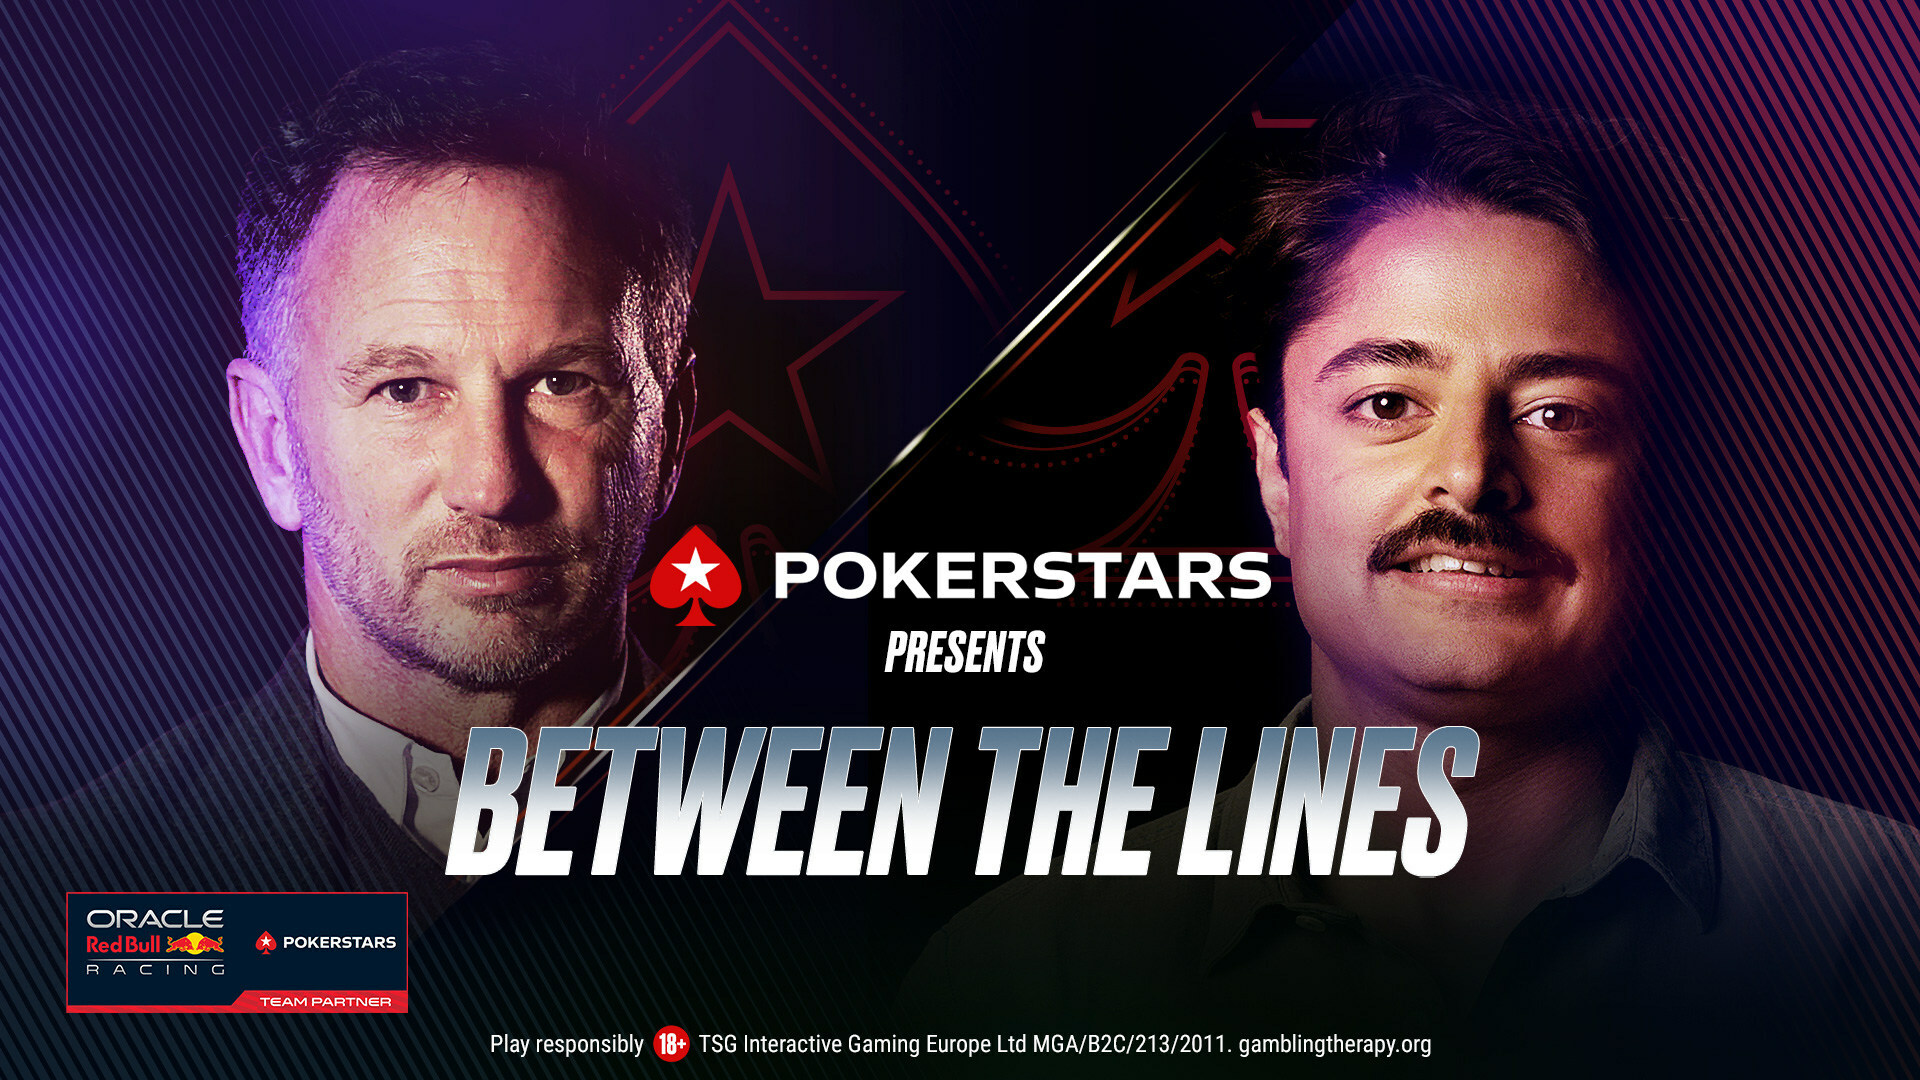 PokerStars and Oracle Red Bull Racing Continue Partnership